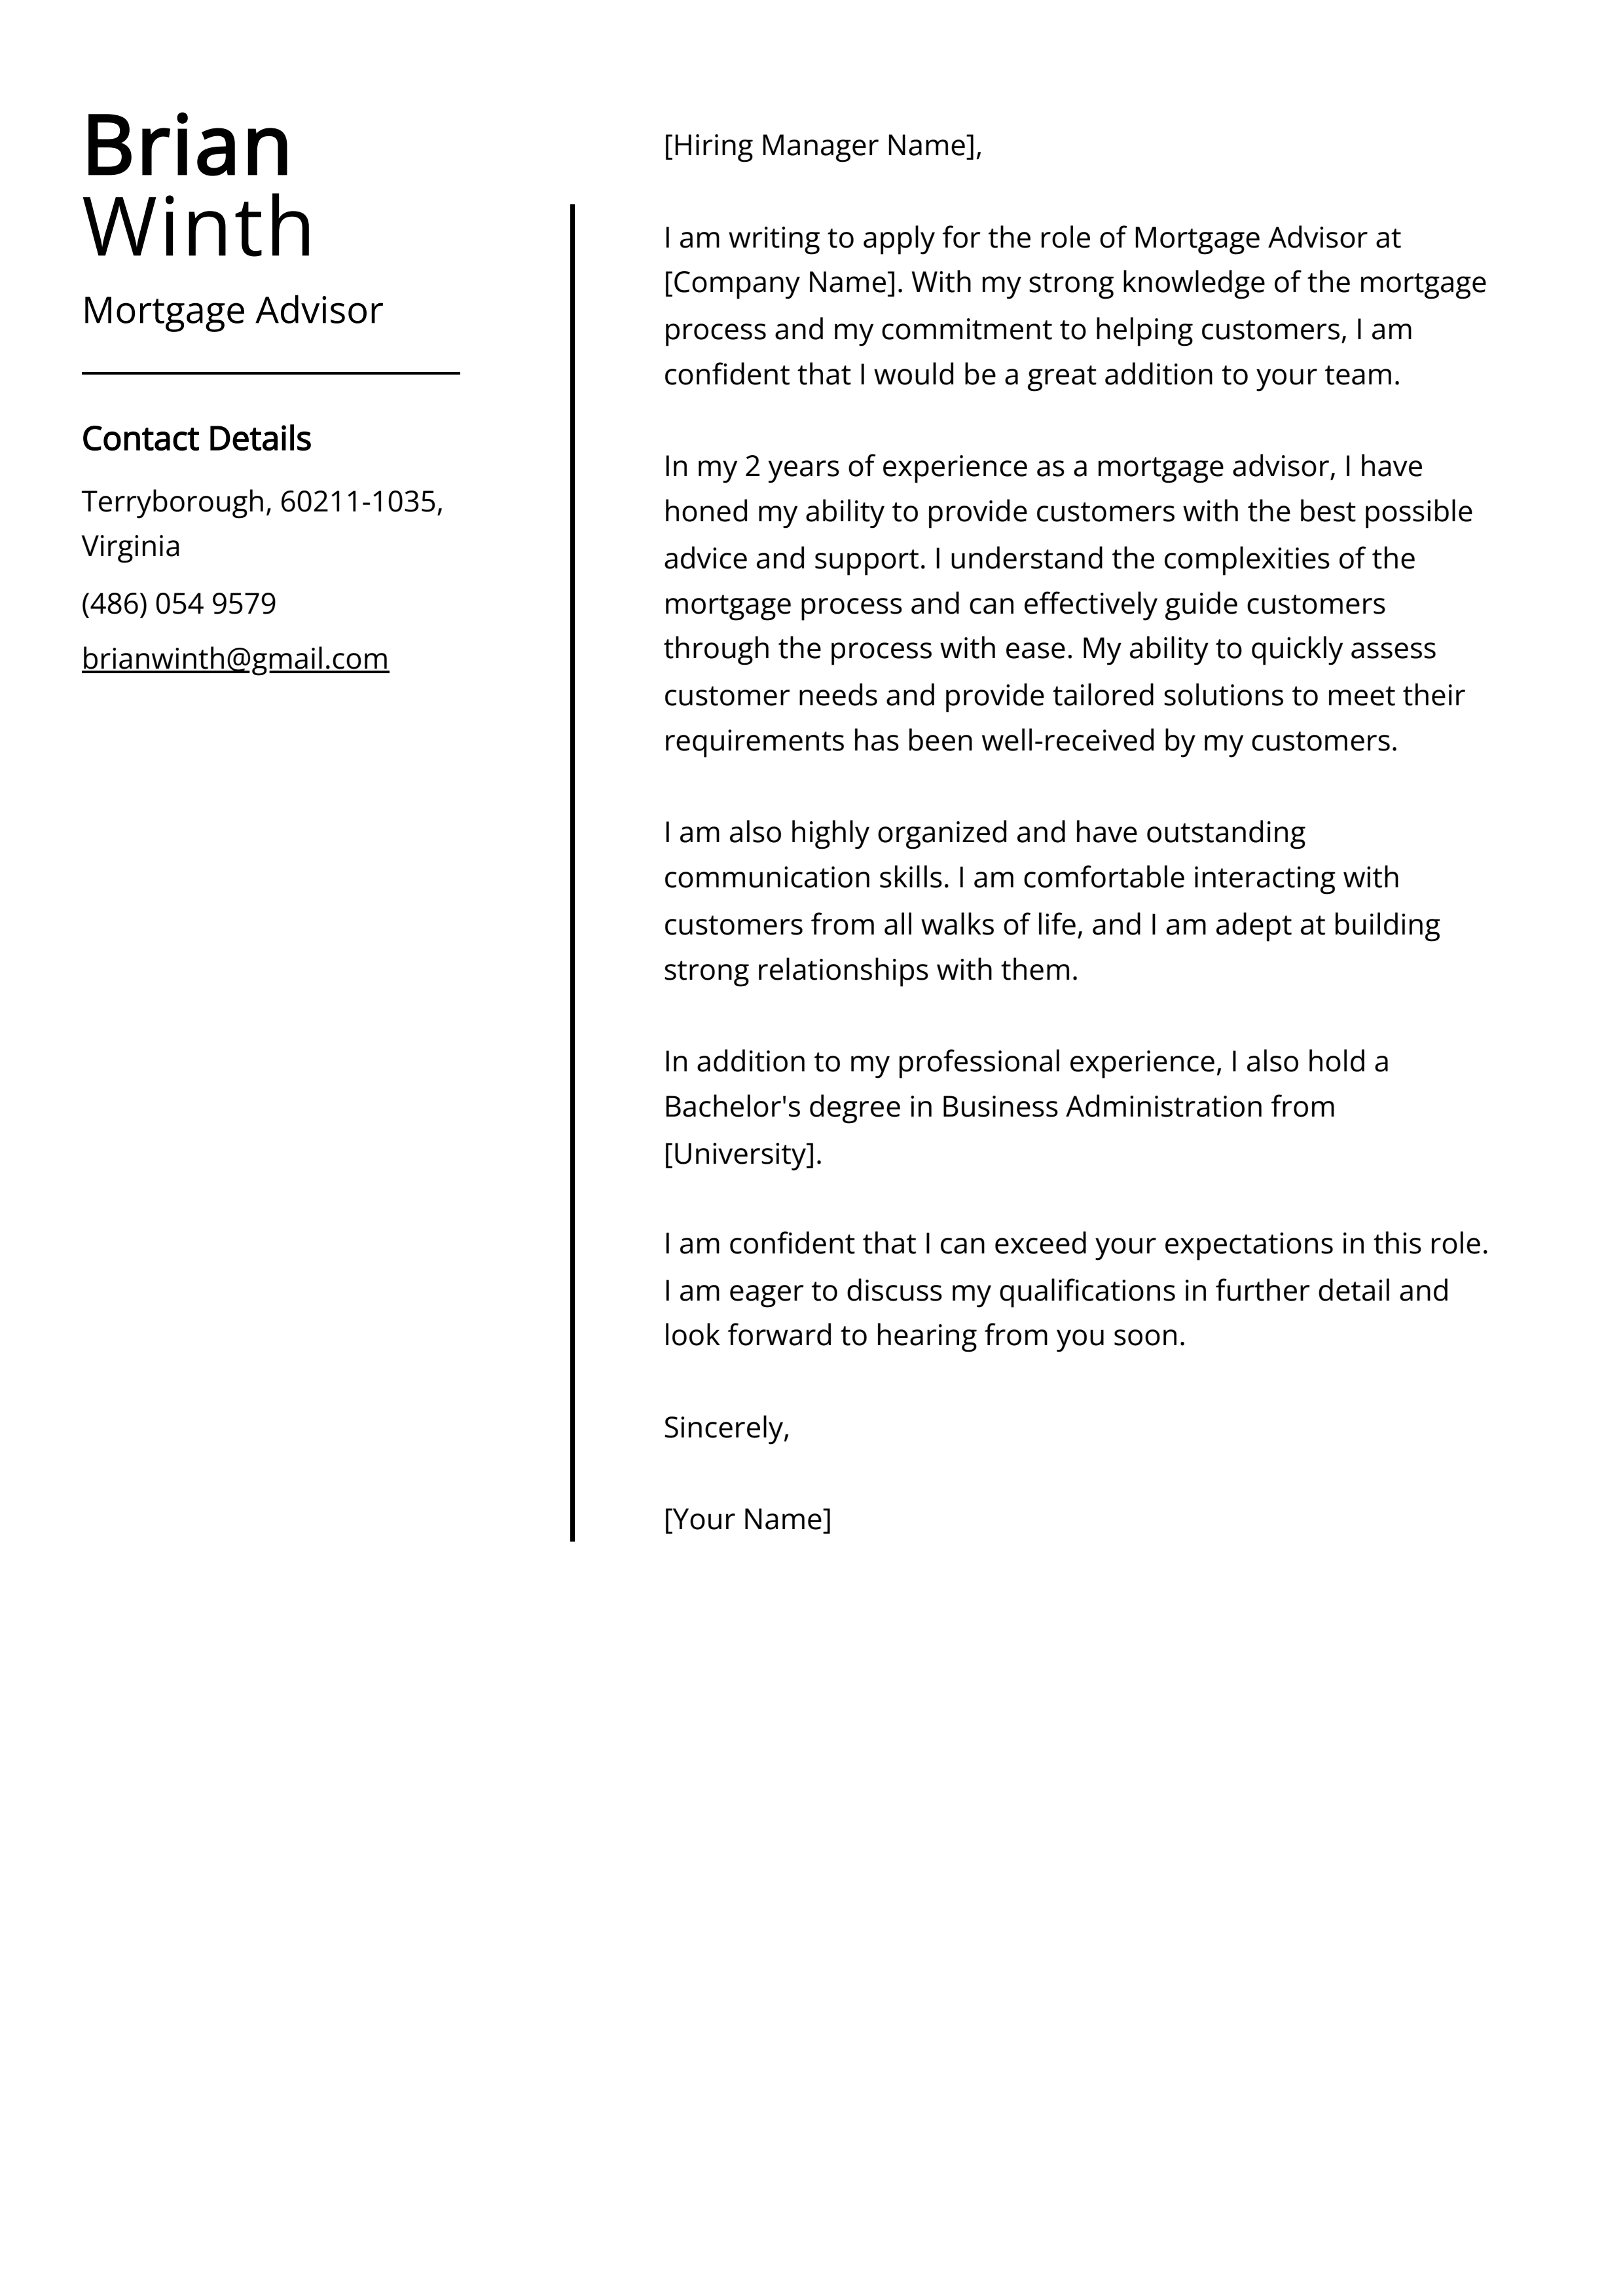 Experienced Mortgage Advisor Cover Letter Example